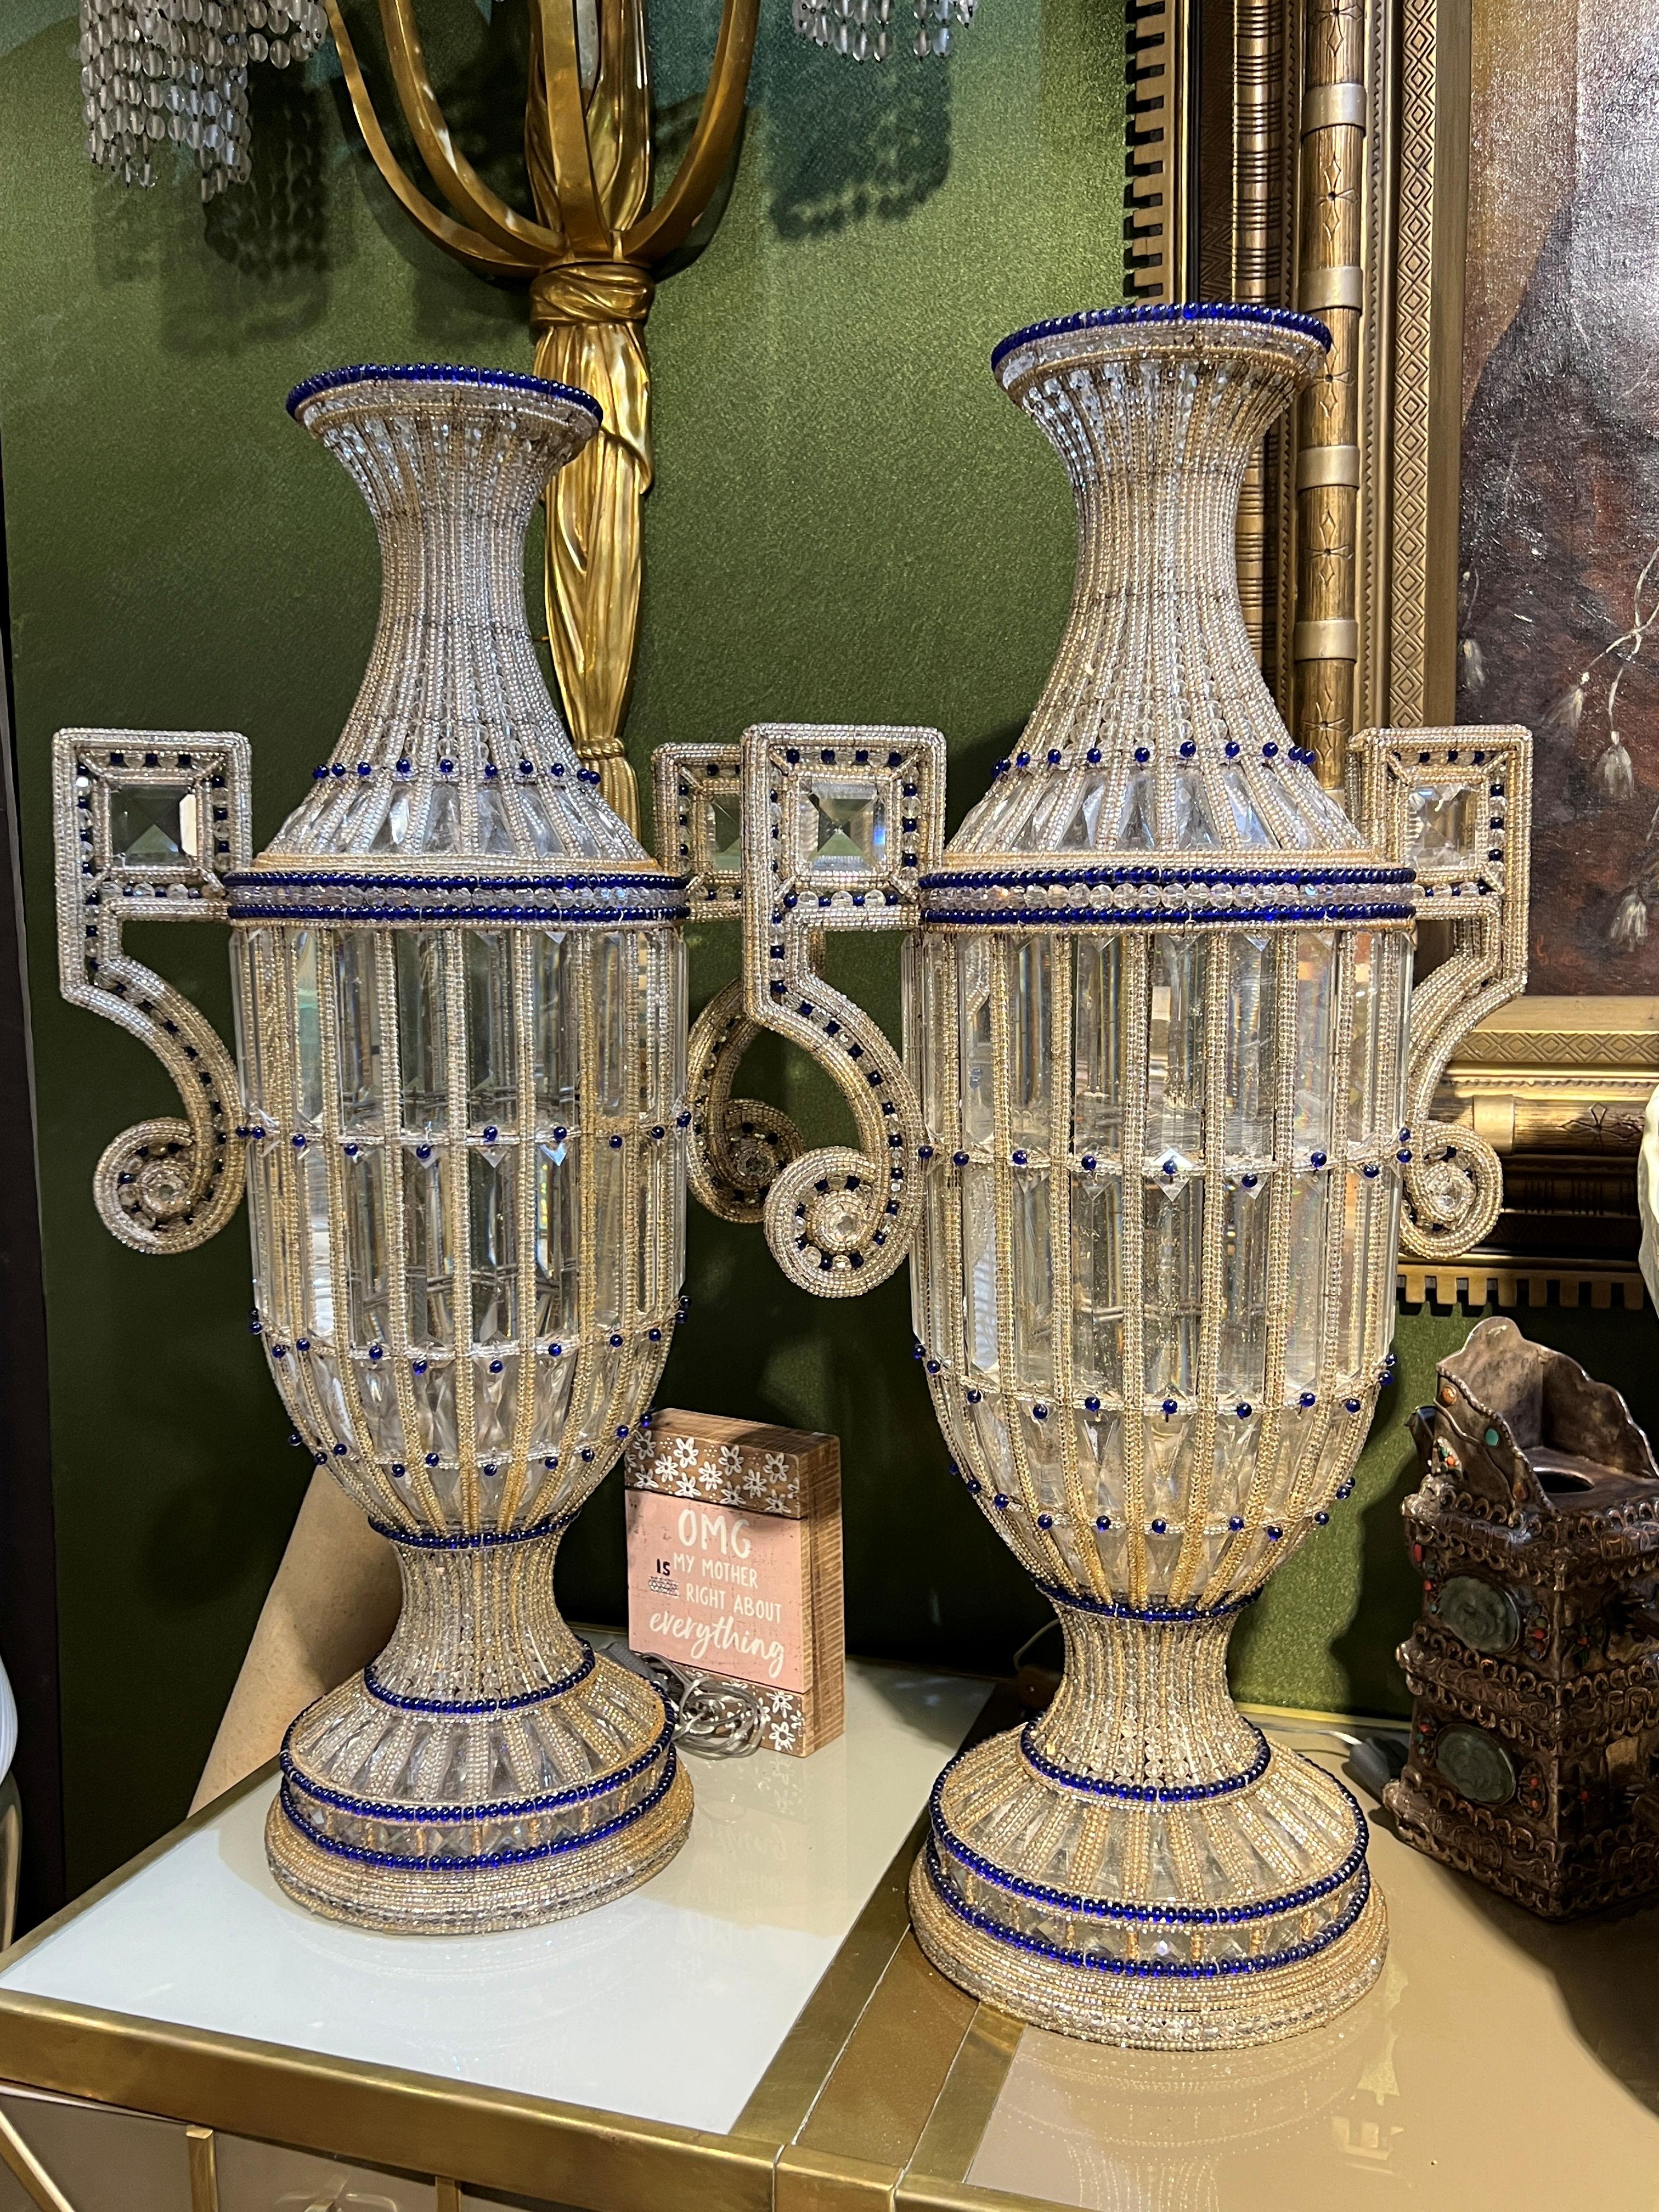 Our lighted glass vases of Italian origin, circa 1950s, are crafted of colorless, faceted glass and glass beads plus beads in royal blue that accent the rims, shoulder, waist and base. With their original ceramic sockets and modern L standard